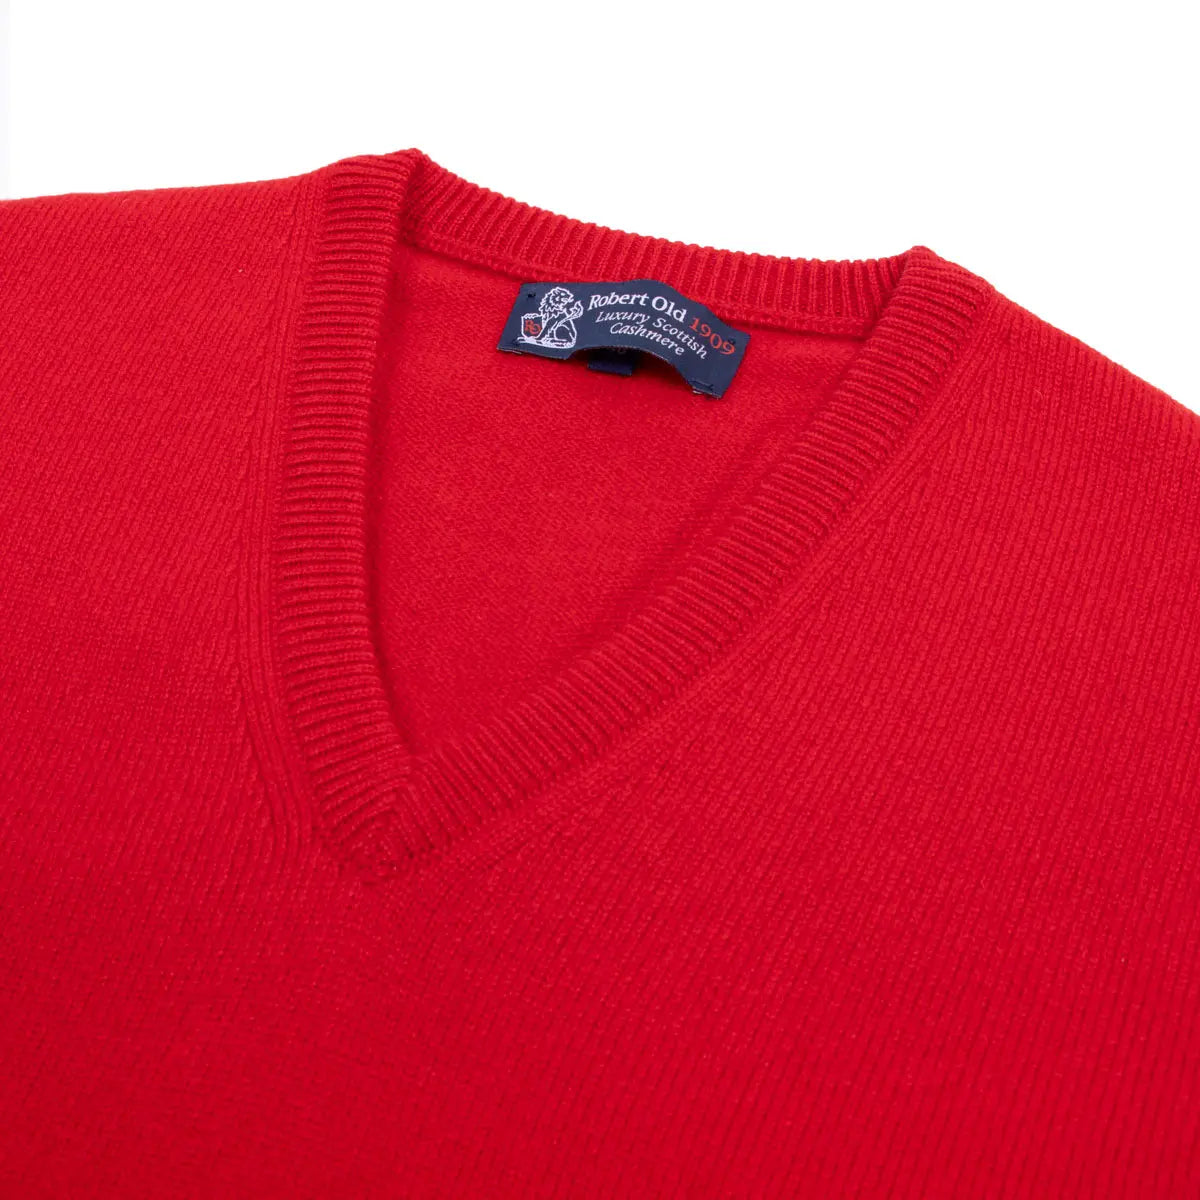 Ruby Red Tobermorey 4ply V-Neck Cashmere Sweater Robert Old